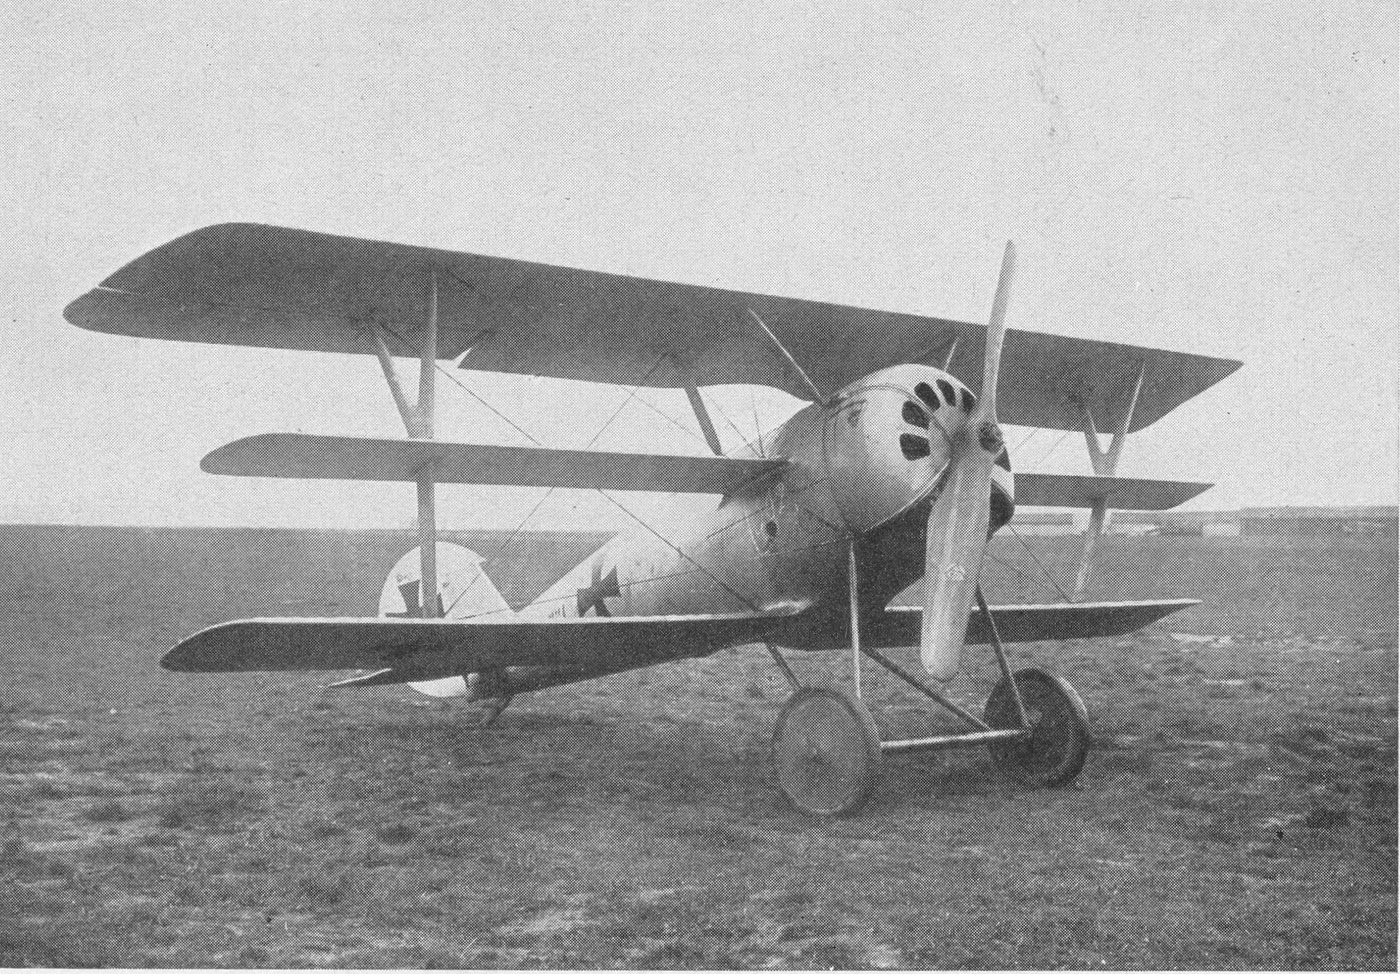 Pfalz Dr.I from the front 